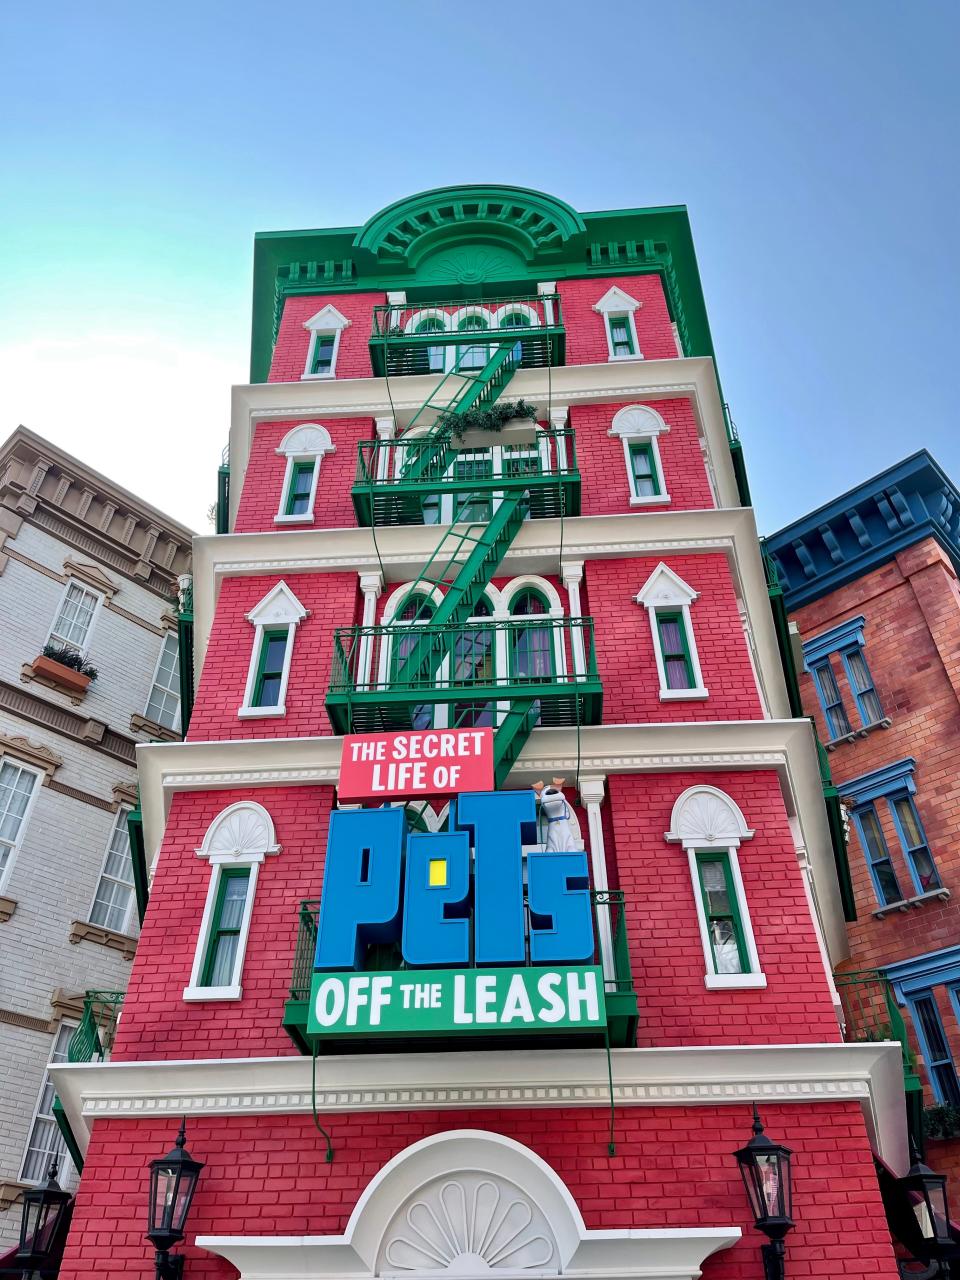 Secret life of pets off the leash ride entrnace with tall red building and green fire escapes up the side